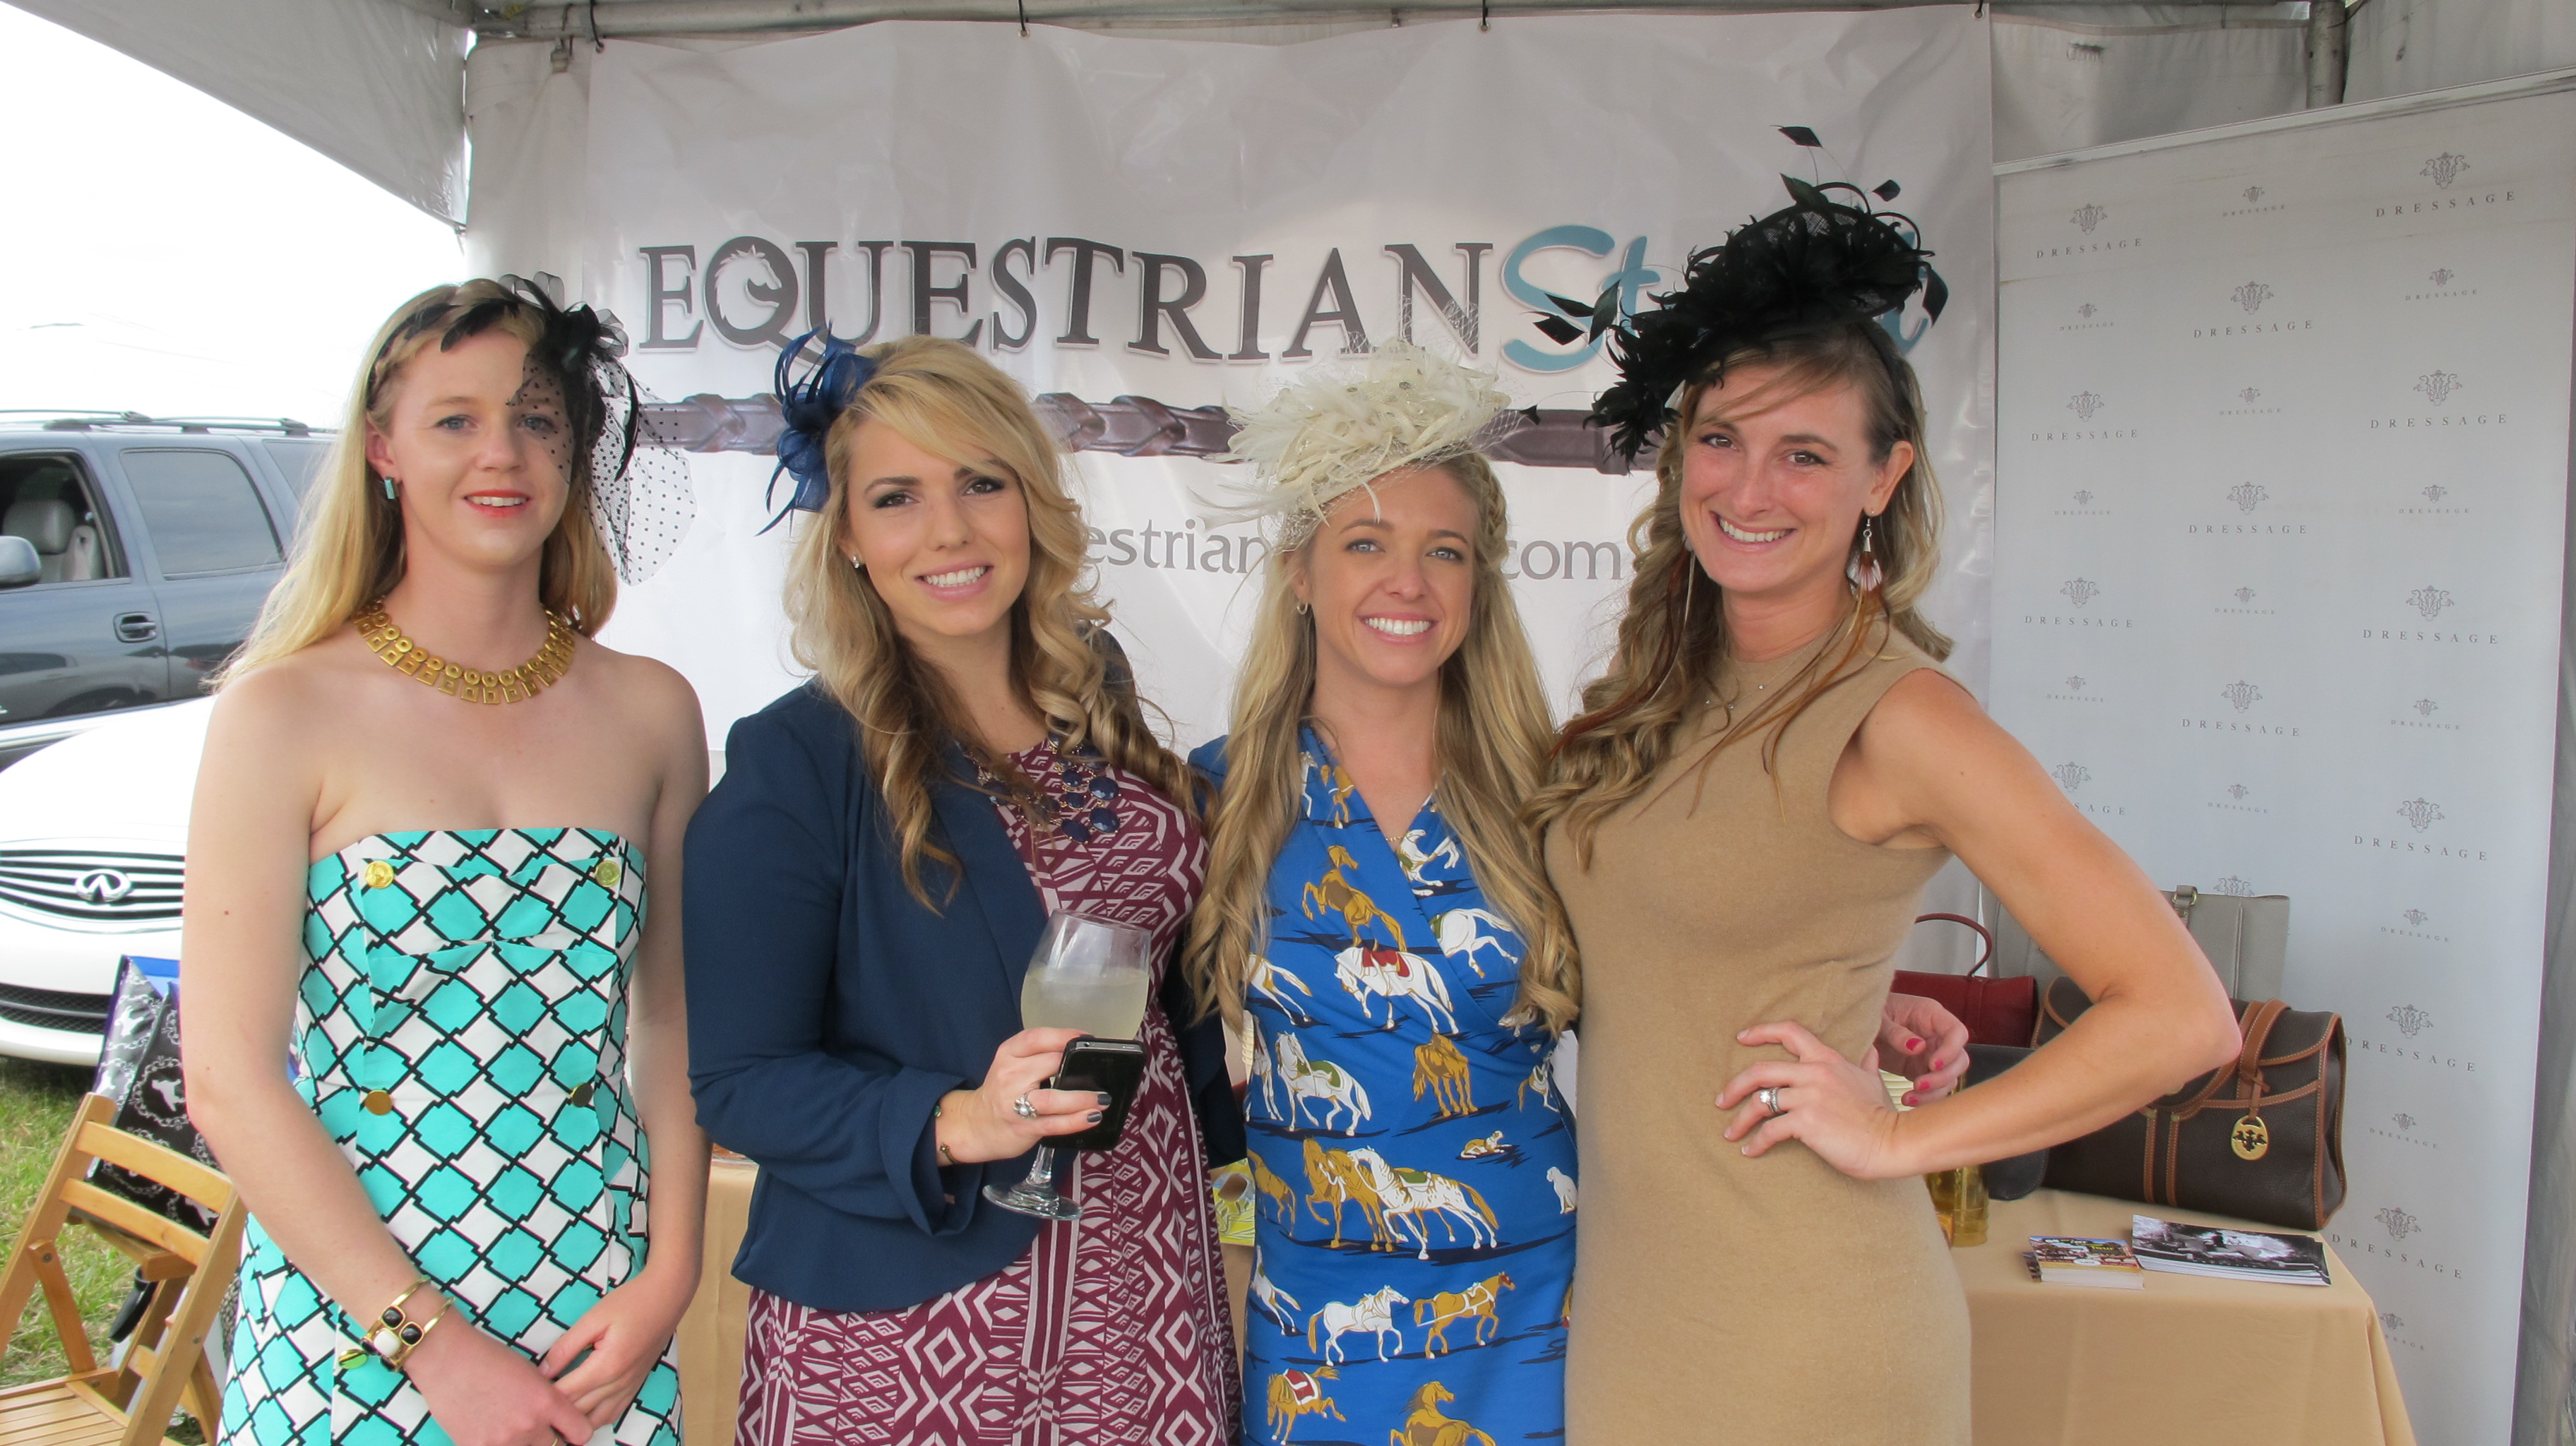 Equestrian Stylist Party at The Charleston Cup 2013